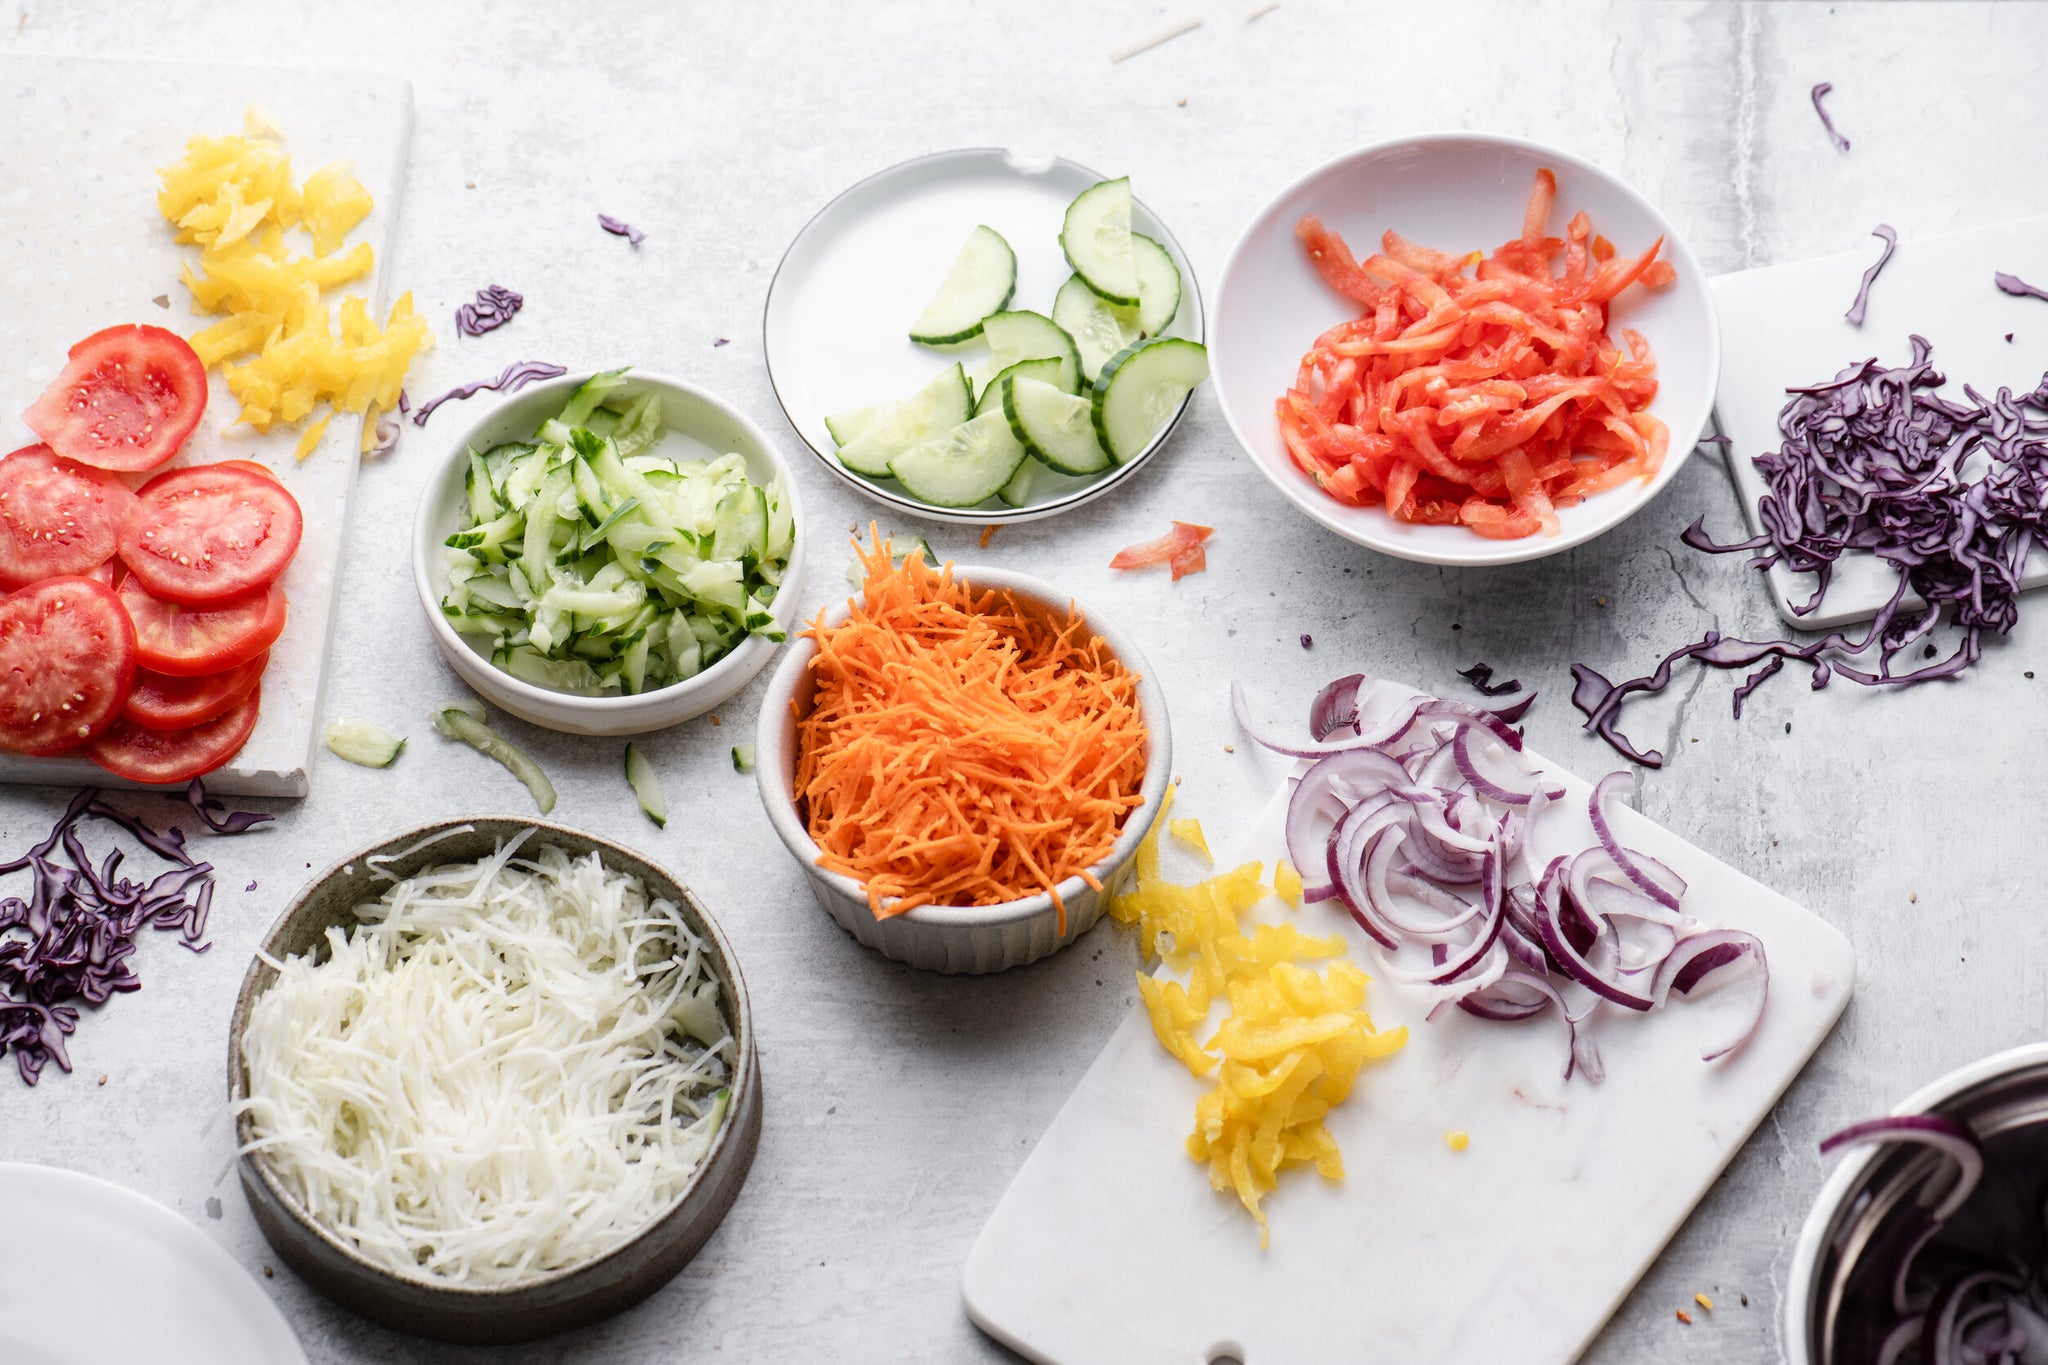 How to easily get more veggies and variety in your meals: There are so many ways to slice (and grate) it!